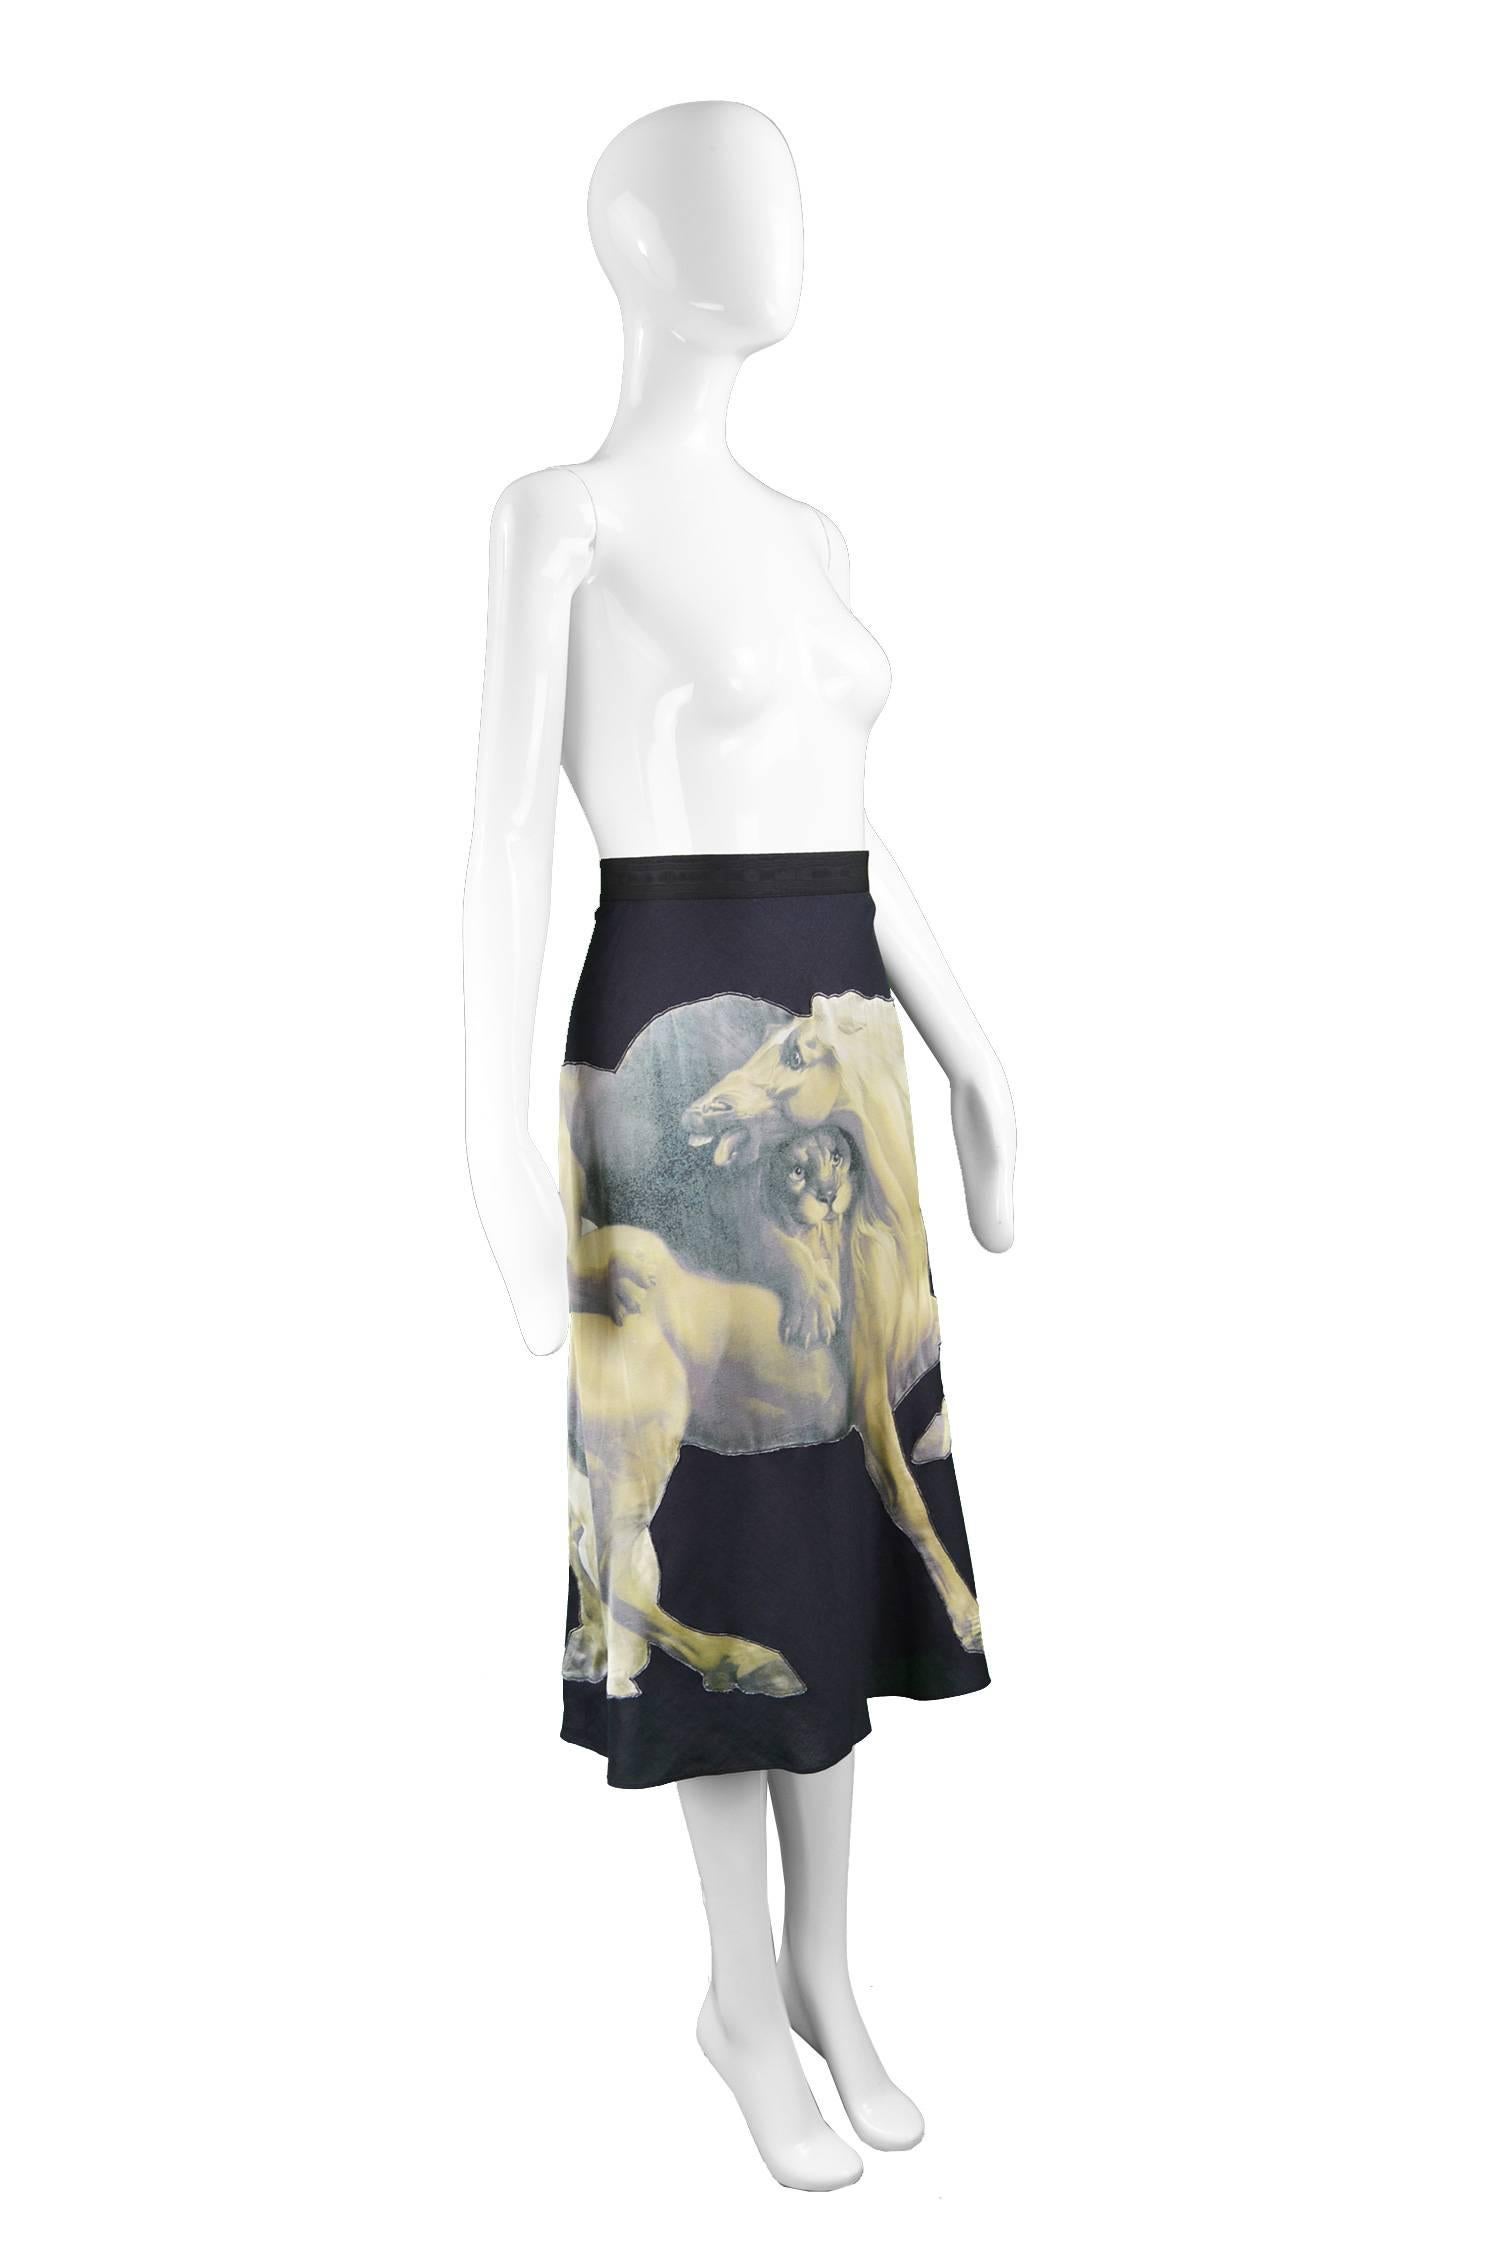 Chloe by Stella McCartney Skirt with George Stubbs Horse Appliqué, S/S 2001 1